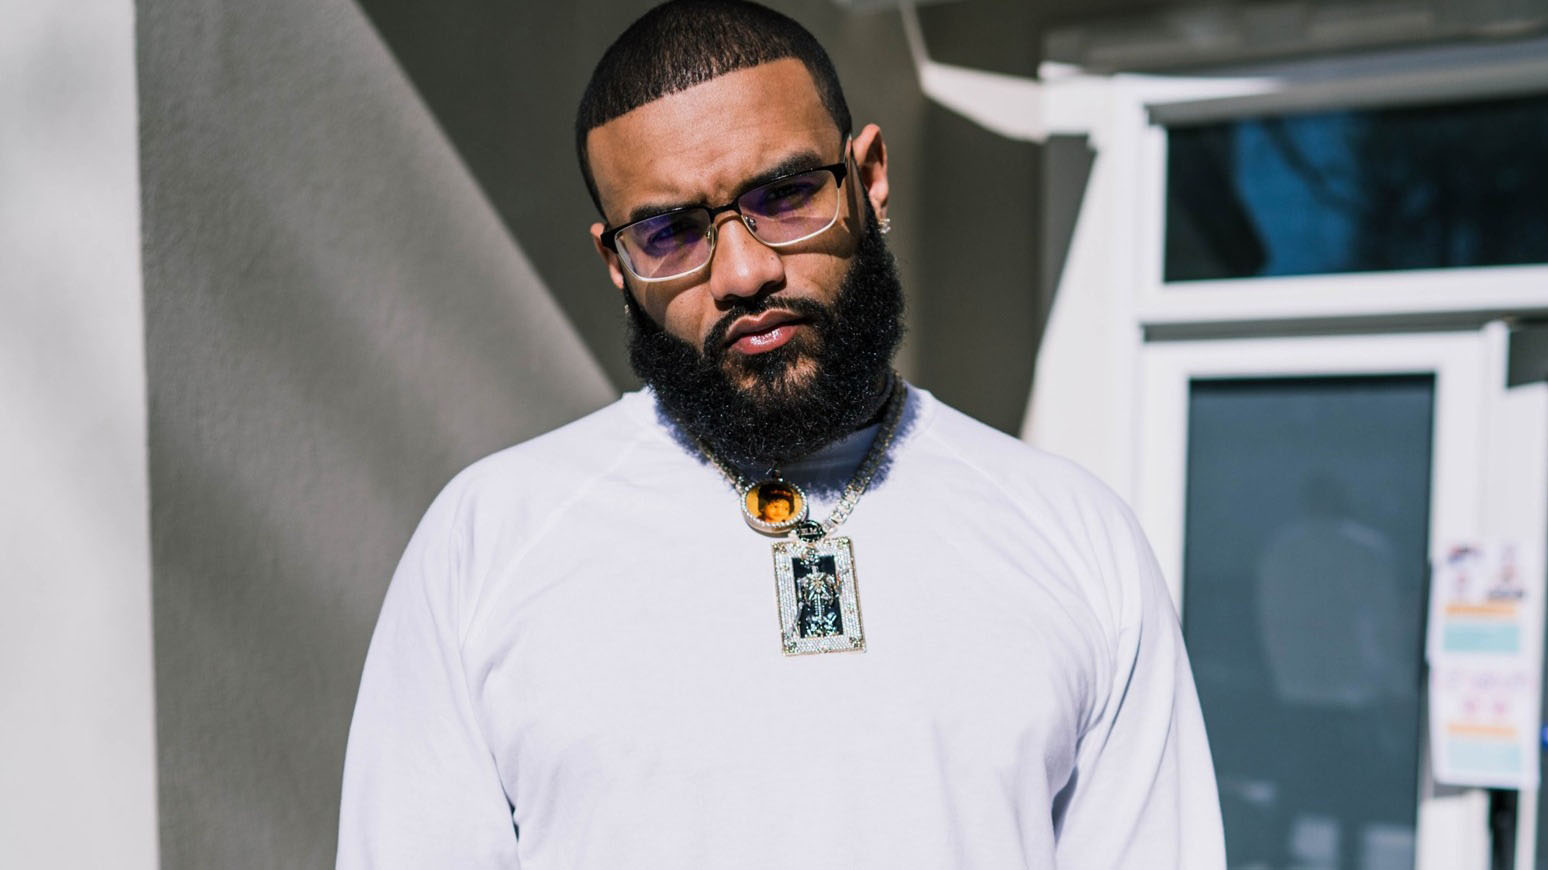 Gary Maurice Lucas Jr. (born August 17, 1988), better known by his stage name Joyner Lucas, is an American rapper, singer, songwriter, recor...